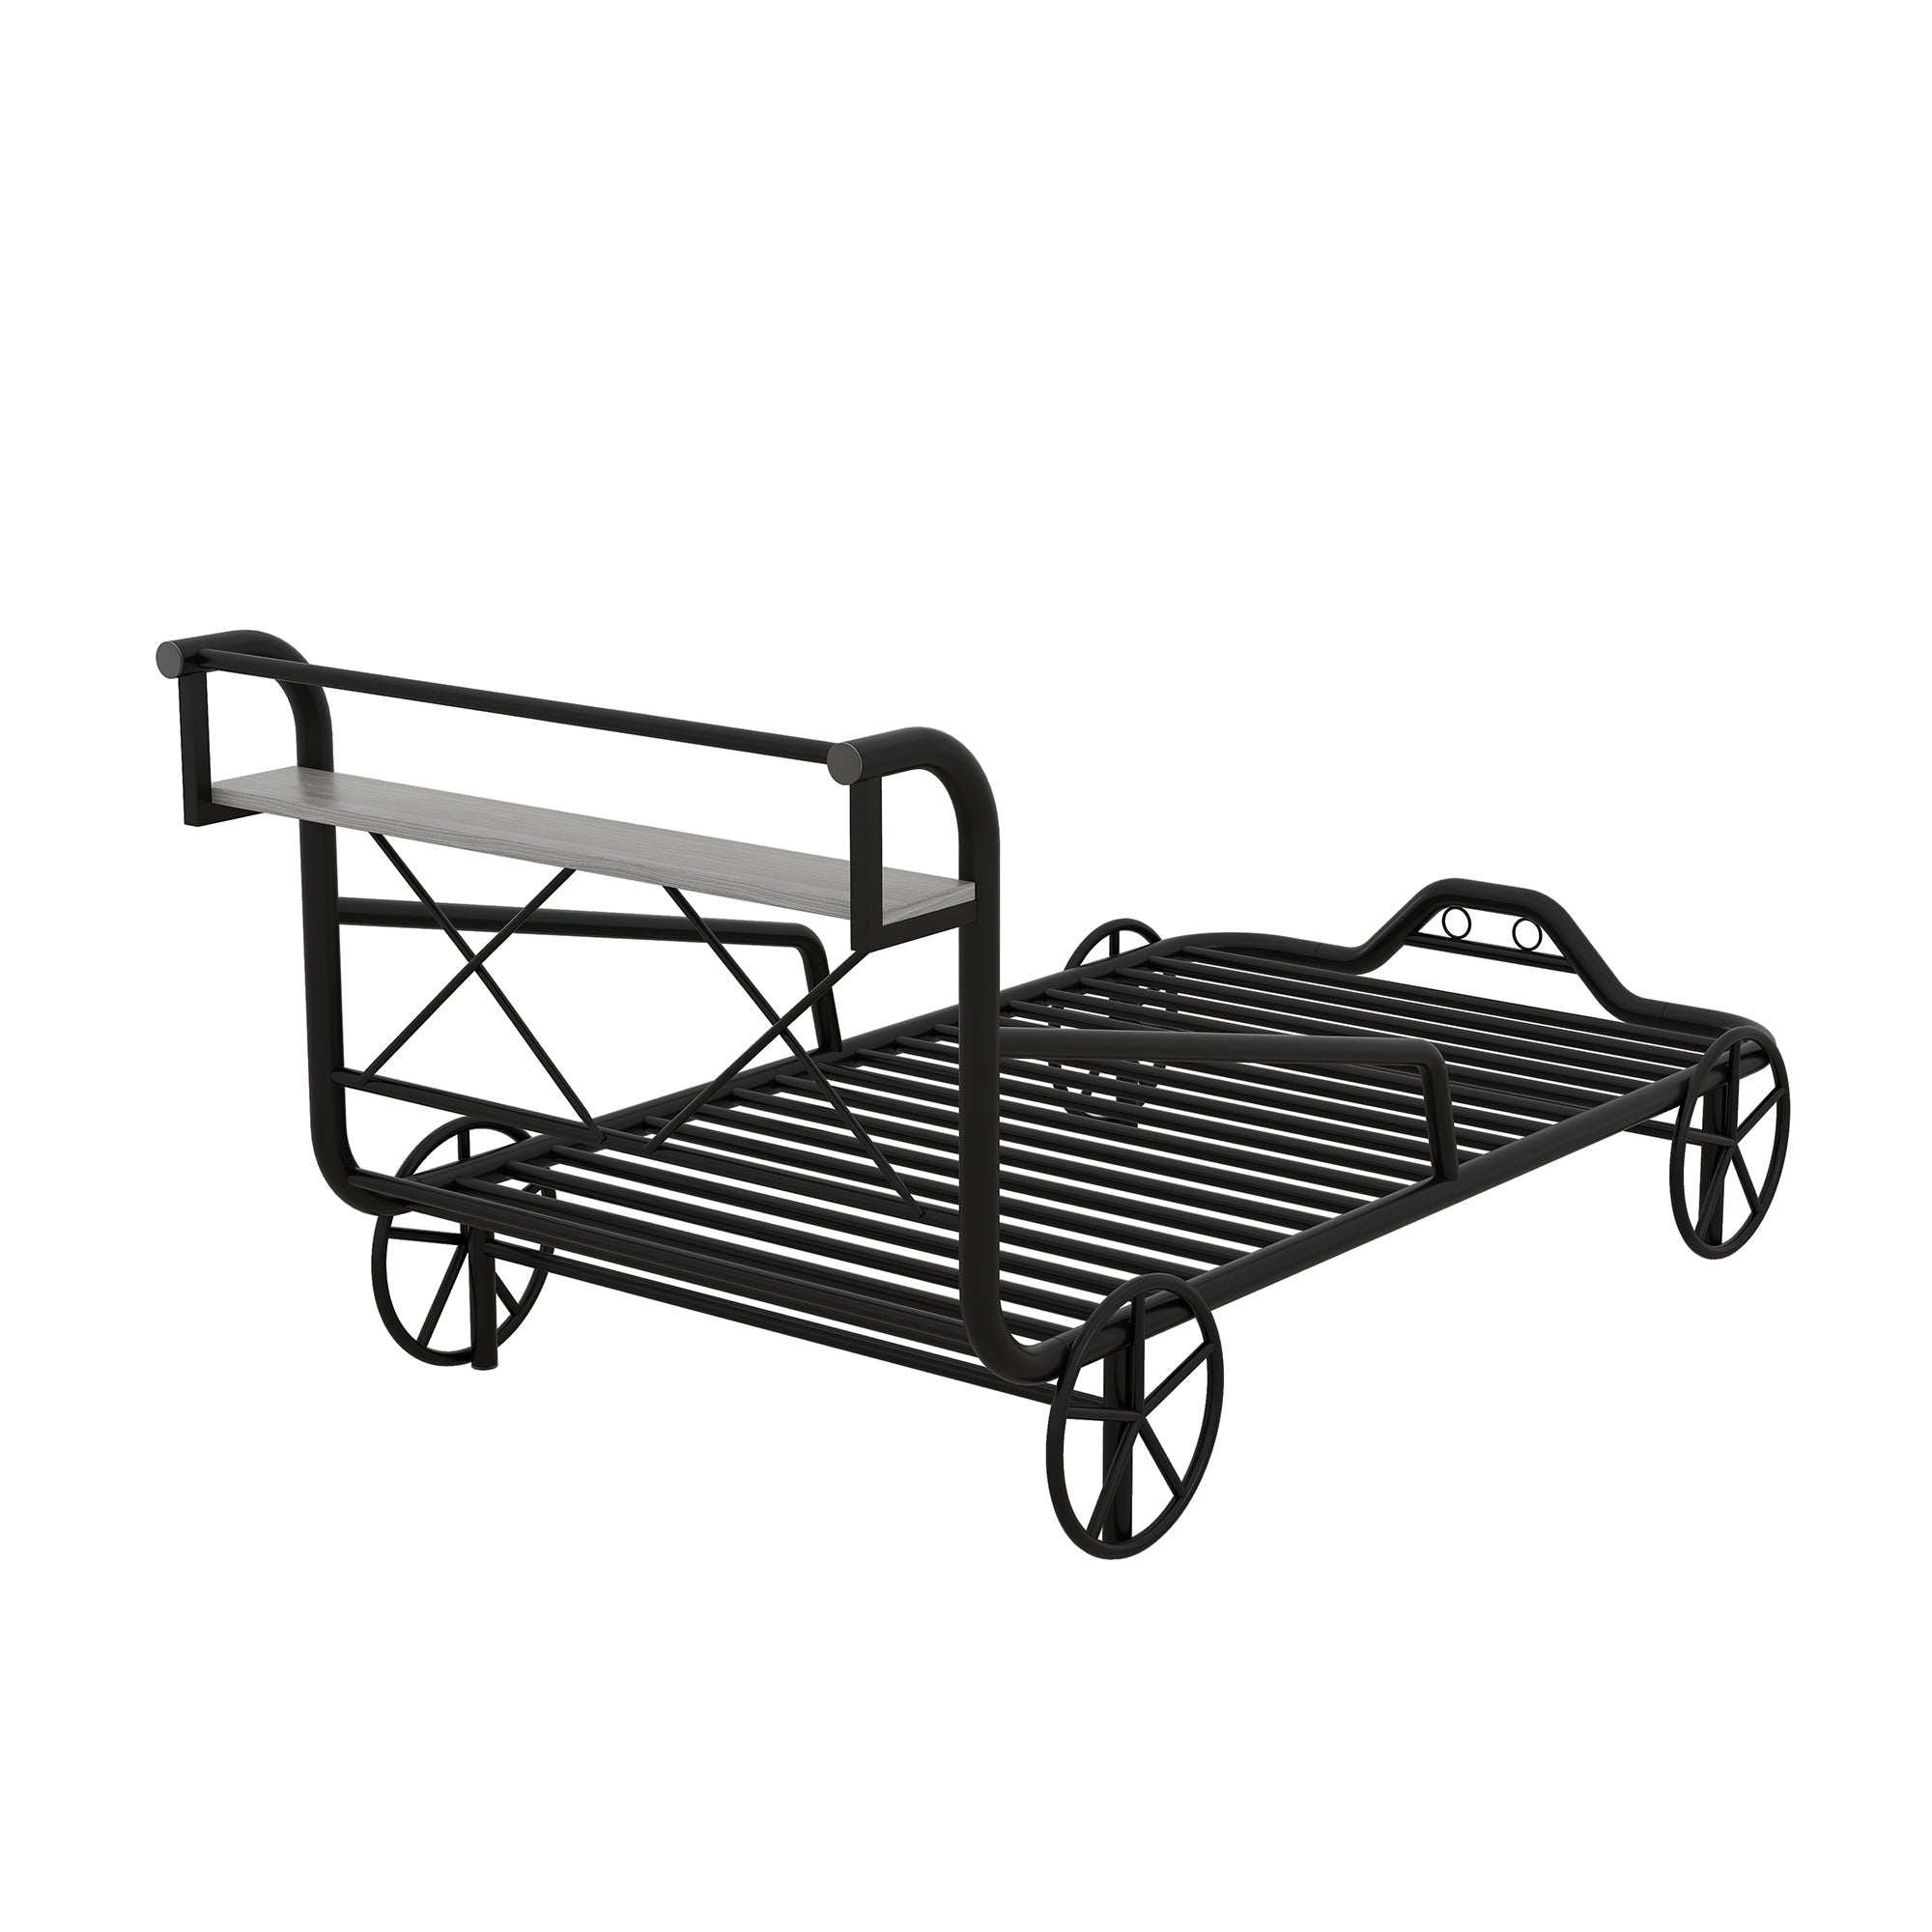 Twin Size Metal Car Bed with Four Wheels, Guardrails box spring not